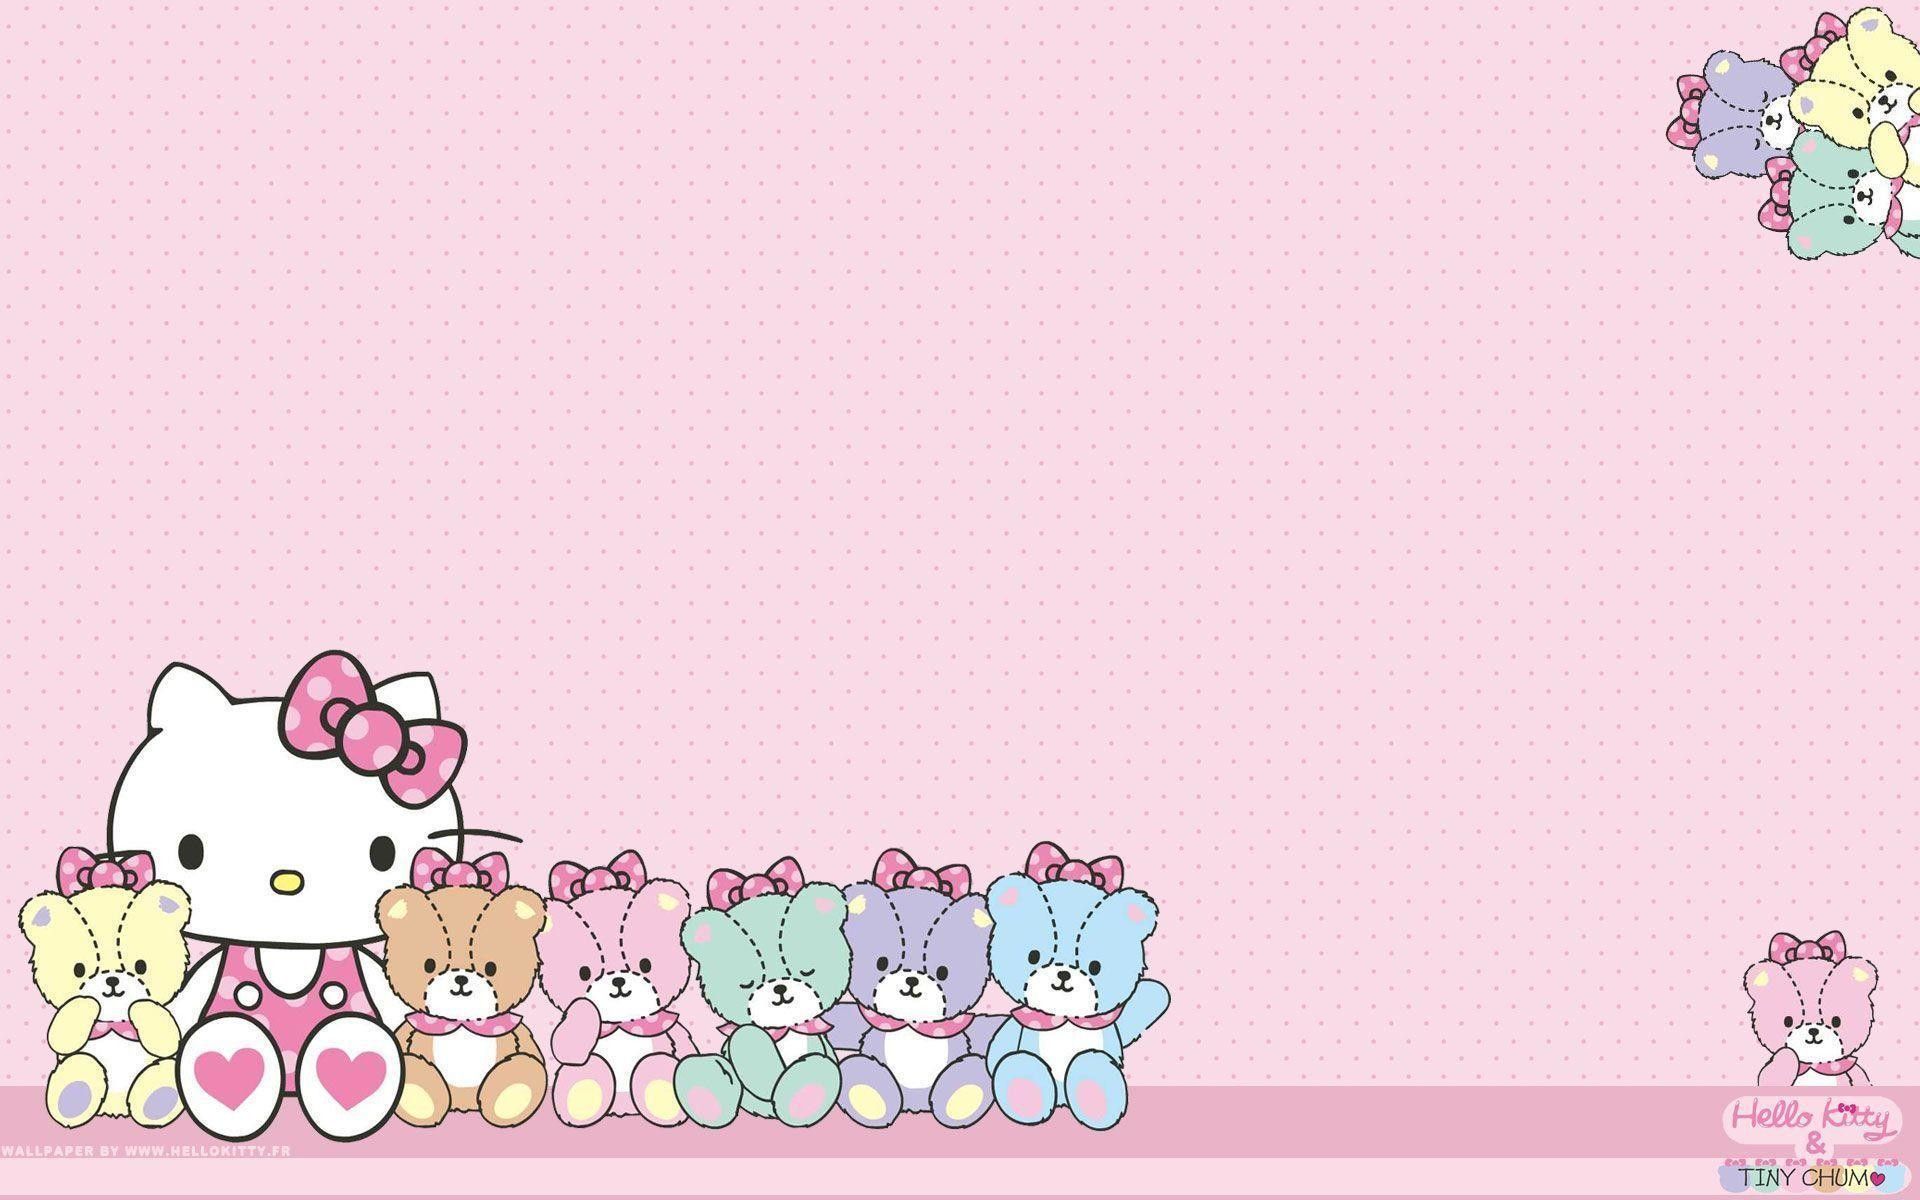 Hello Kitty Wallpaper for Computer